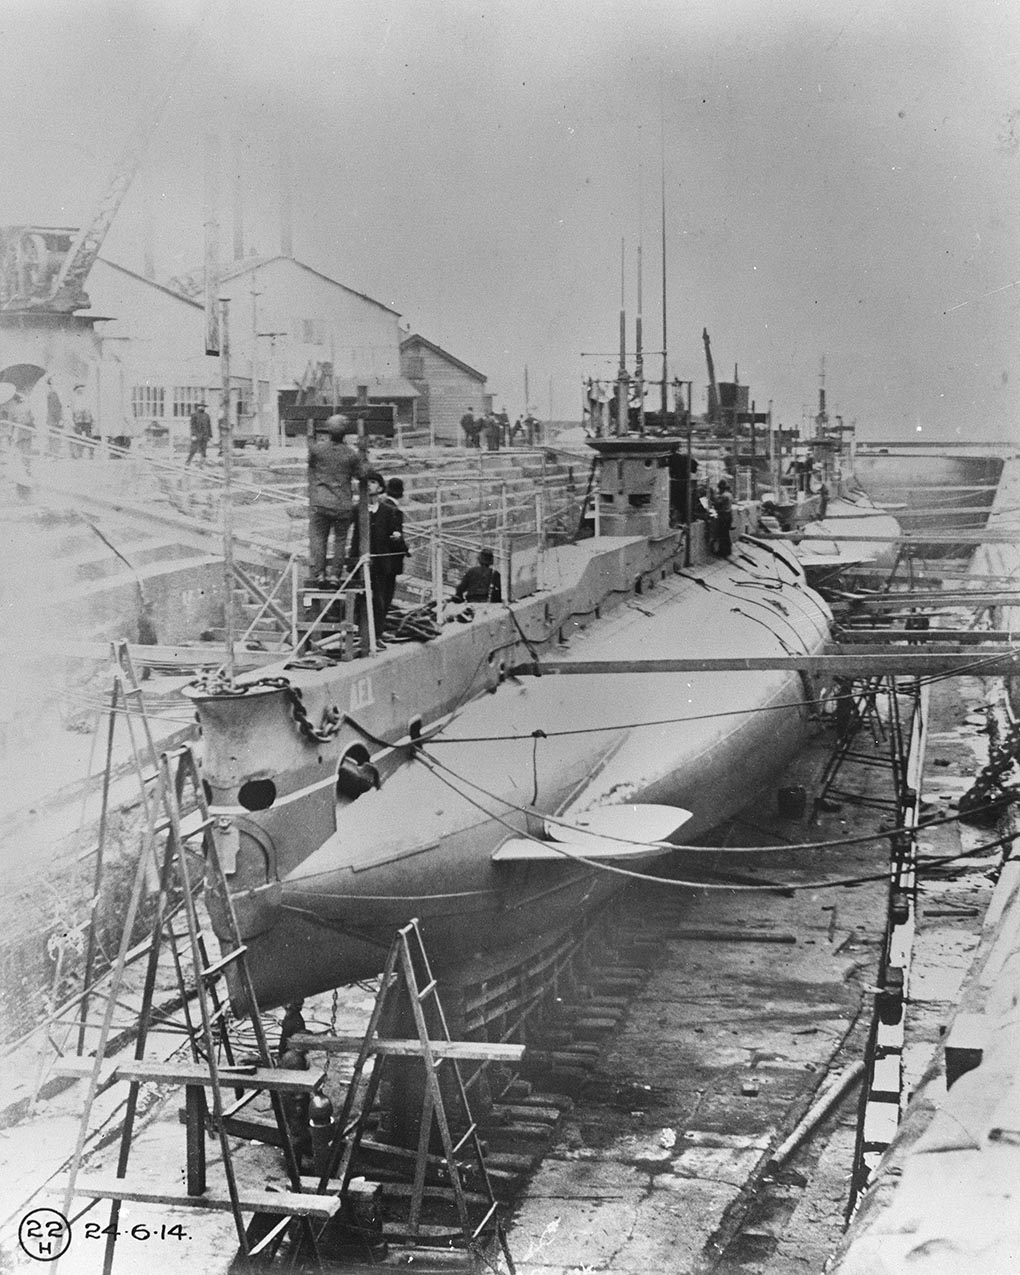 AE1(front) and AE2 in Fitzroy Dock, Cockatoo Island, Sydney, June 1914. Image courtesy Royal Australian Navy.